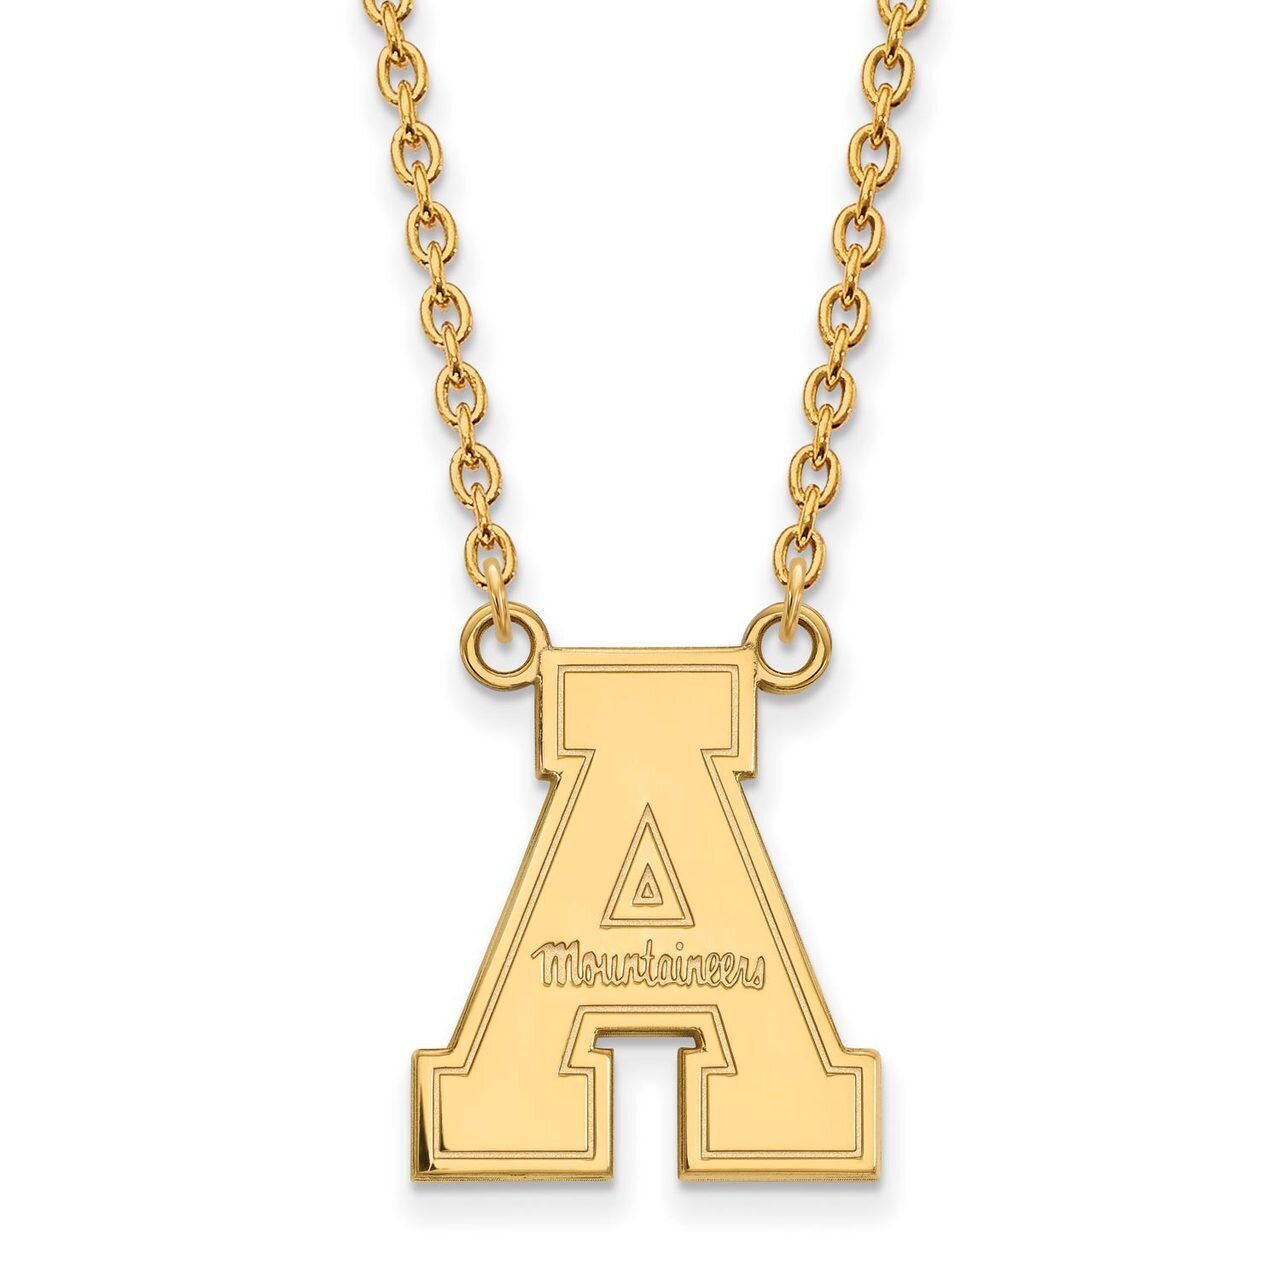 Appalachian State University Large Pendant with Chain Necklace Gold-plated Silver GP012APS-18